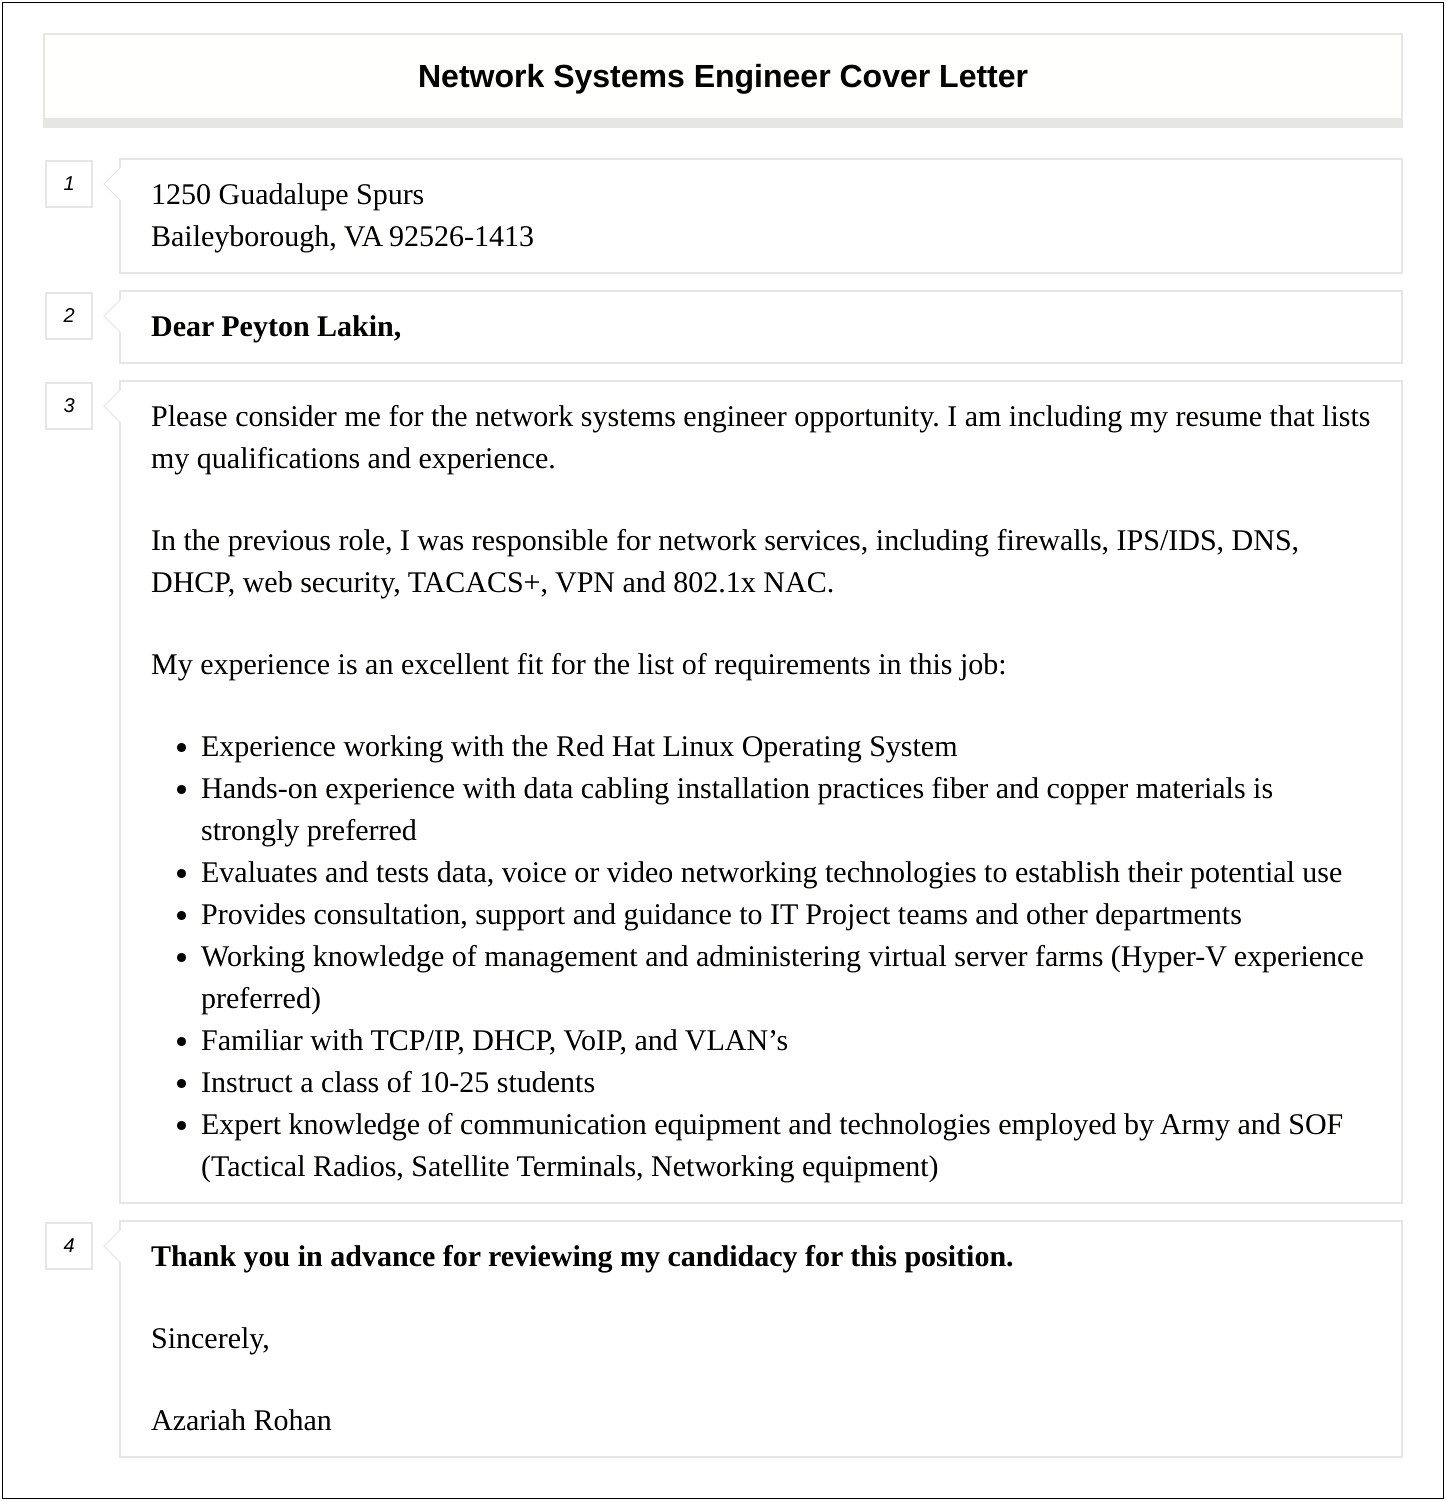 Resume And Cover Letter Opportunity Network Pdf